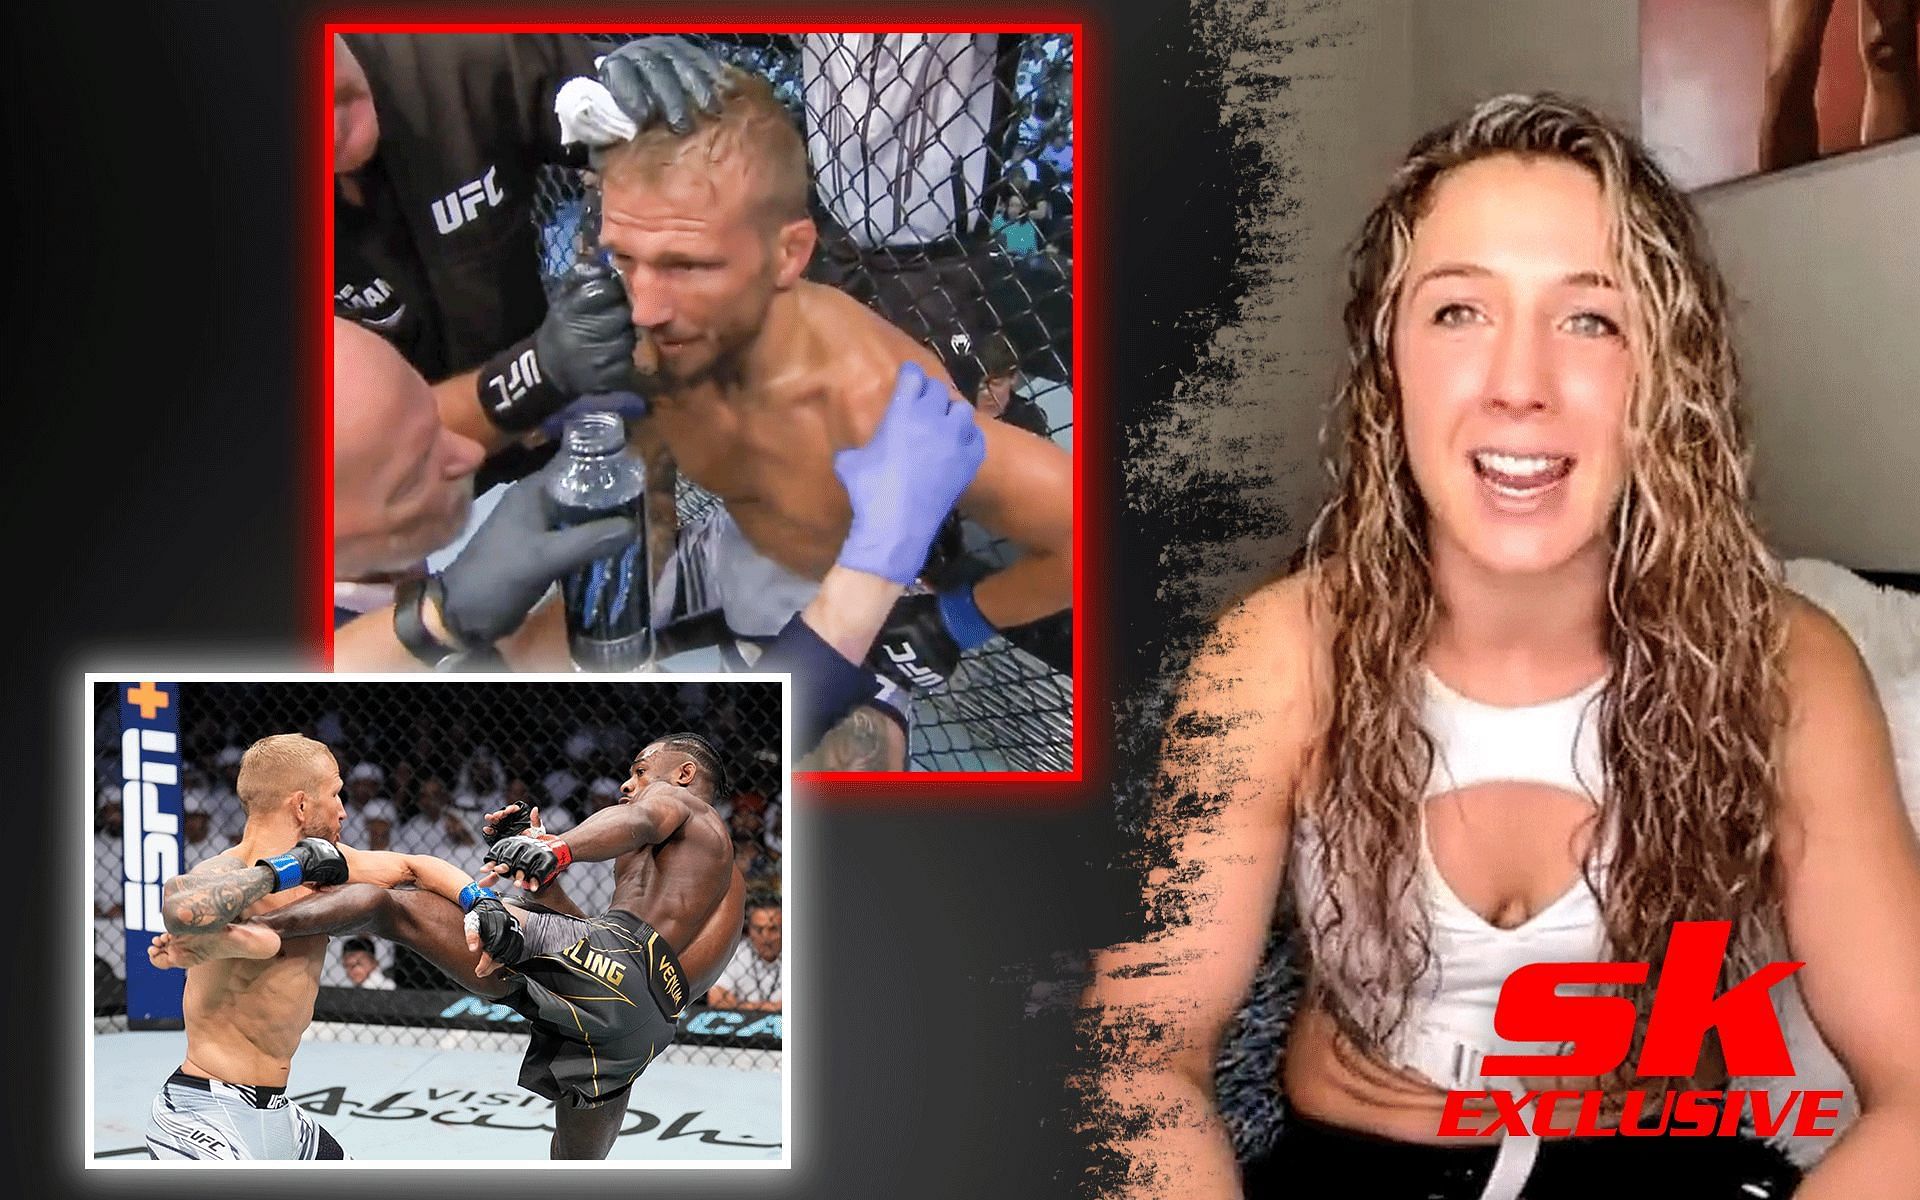  T.J. Dillashaw choosing to fight Aljamain Sterling at UFC 280 with injured shoulder was &quot;extraordinarily irresponsible&quot;, says Vanessa Demopoulos [Image credits: @ufceurope and @MMAFighting on Twitter]